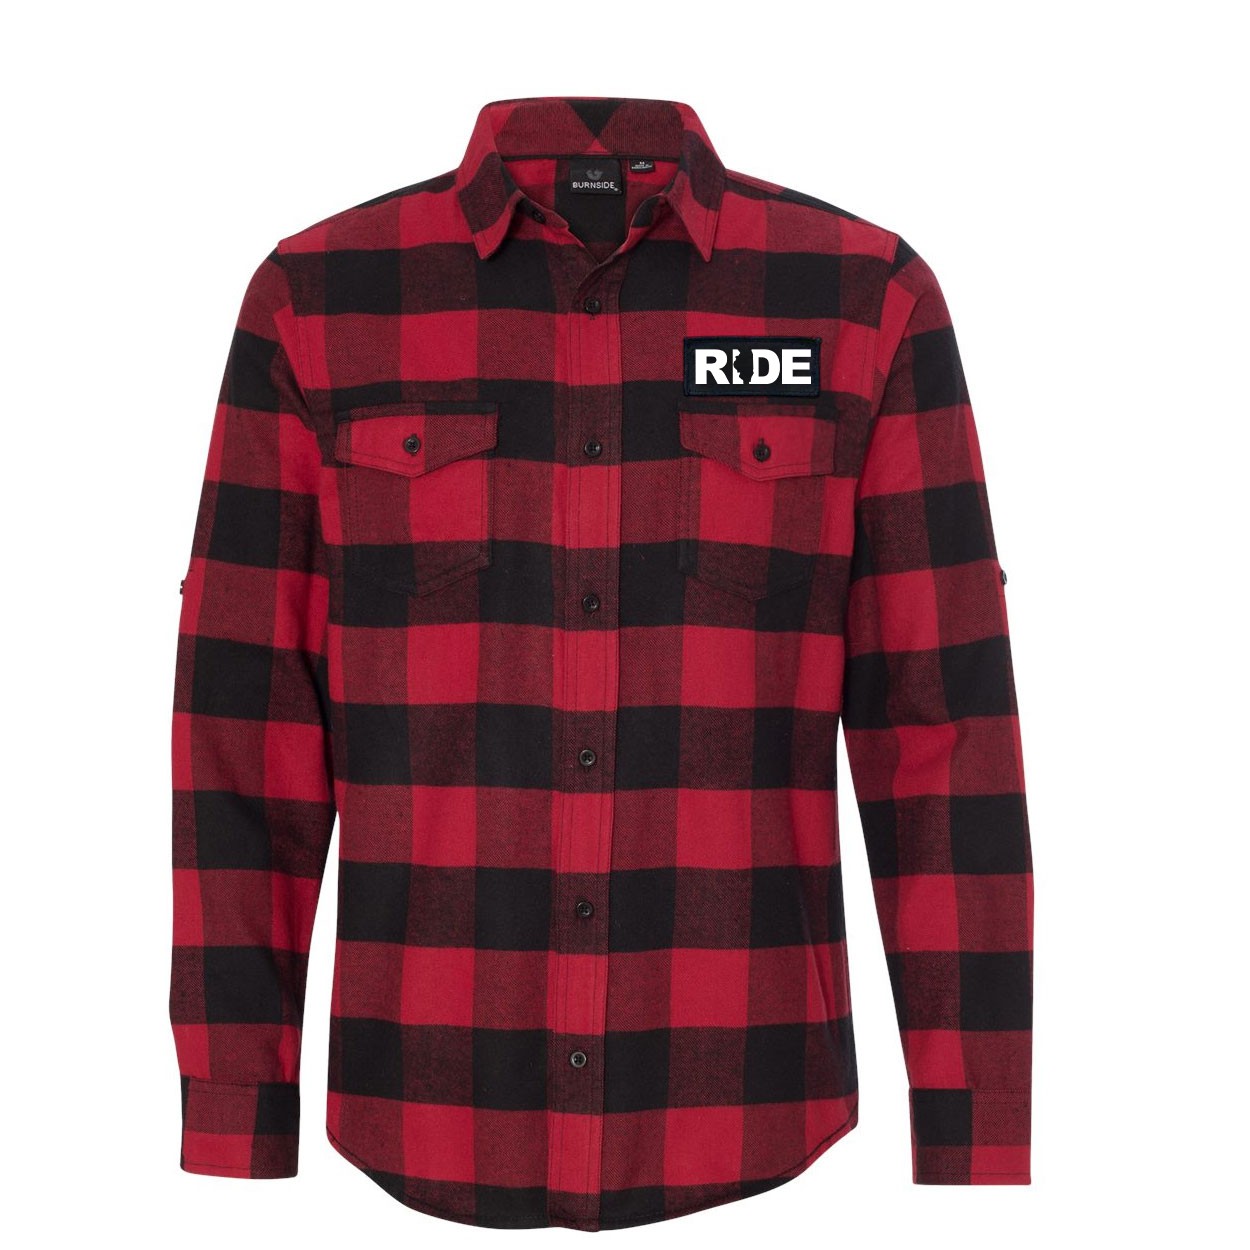 Ride Illinois Classic Unisex Long Sleeve Woven Patch Flannel Shirt Red/Black Buffalo (White Logo)